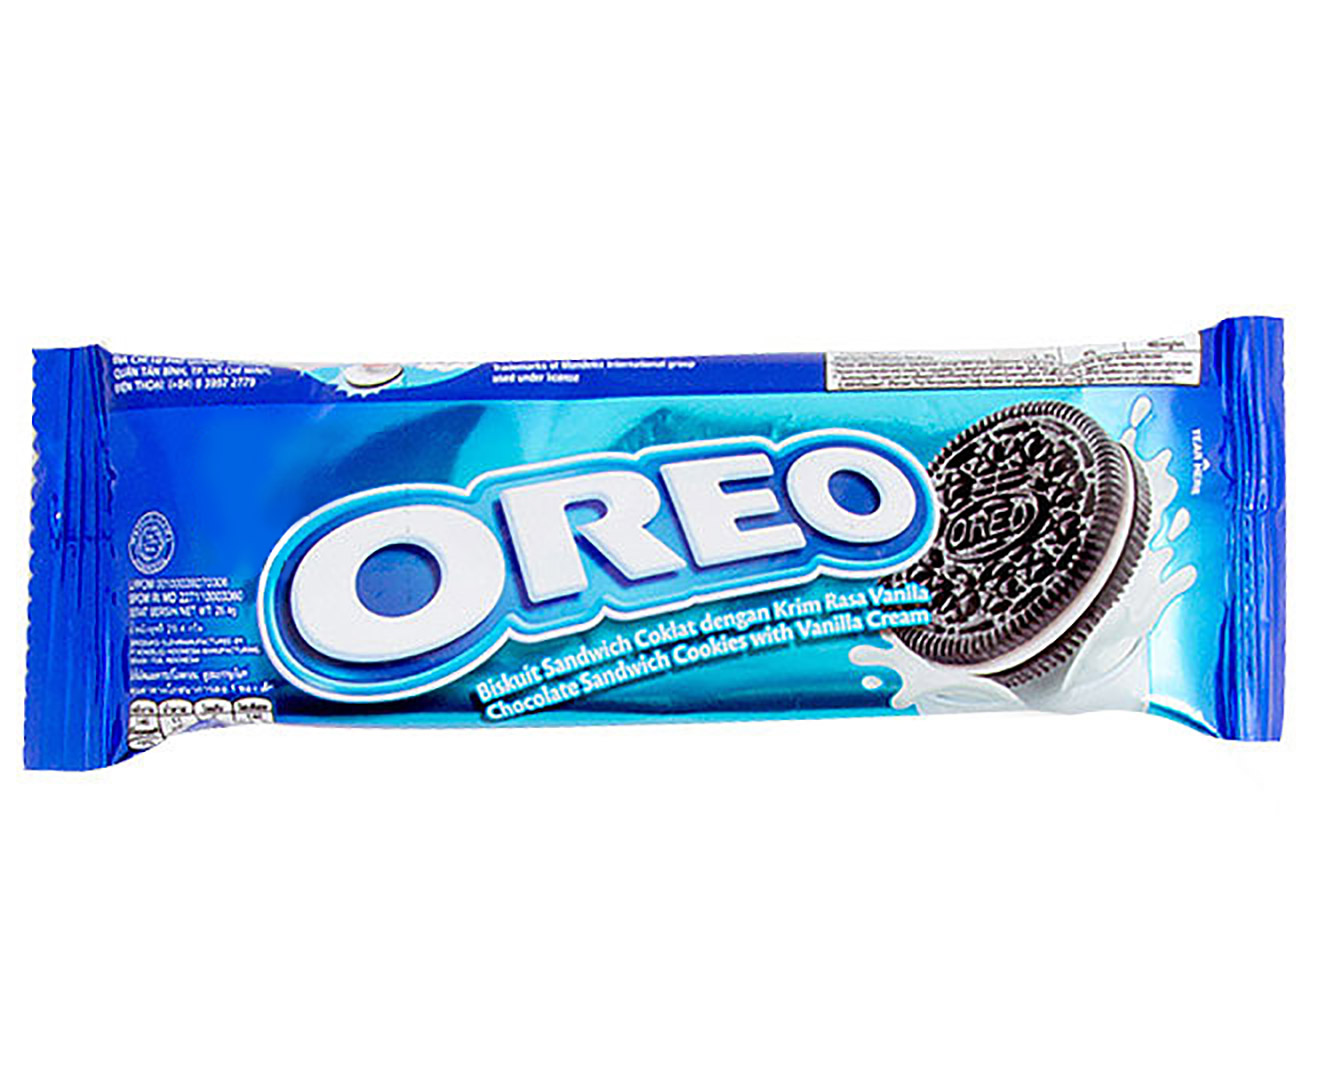 In fact, since 1912, Oreo biscuits have been a top shelf.